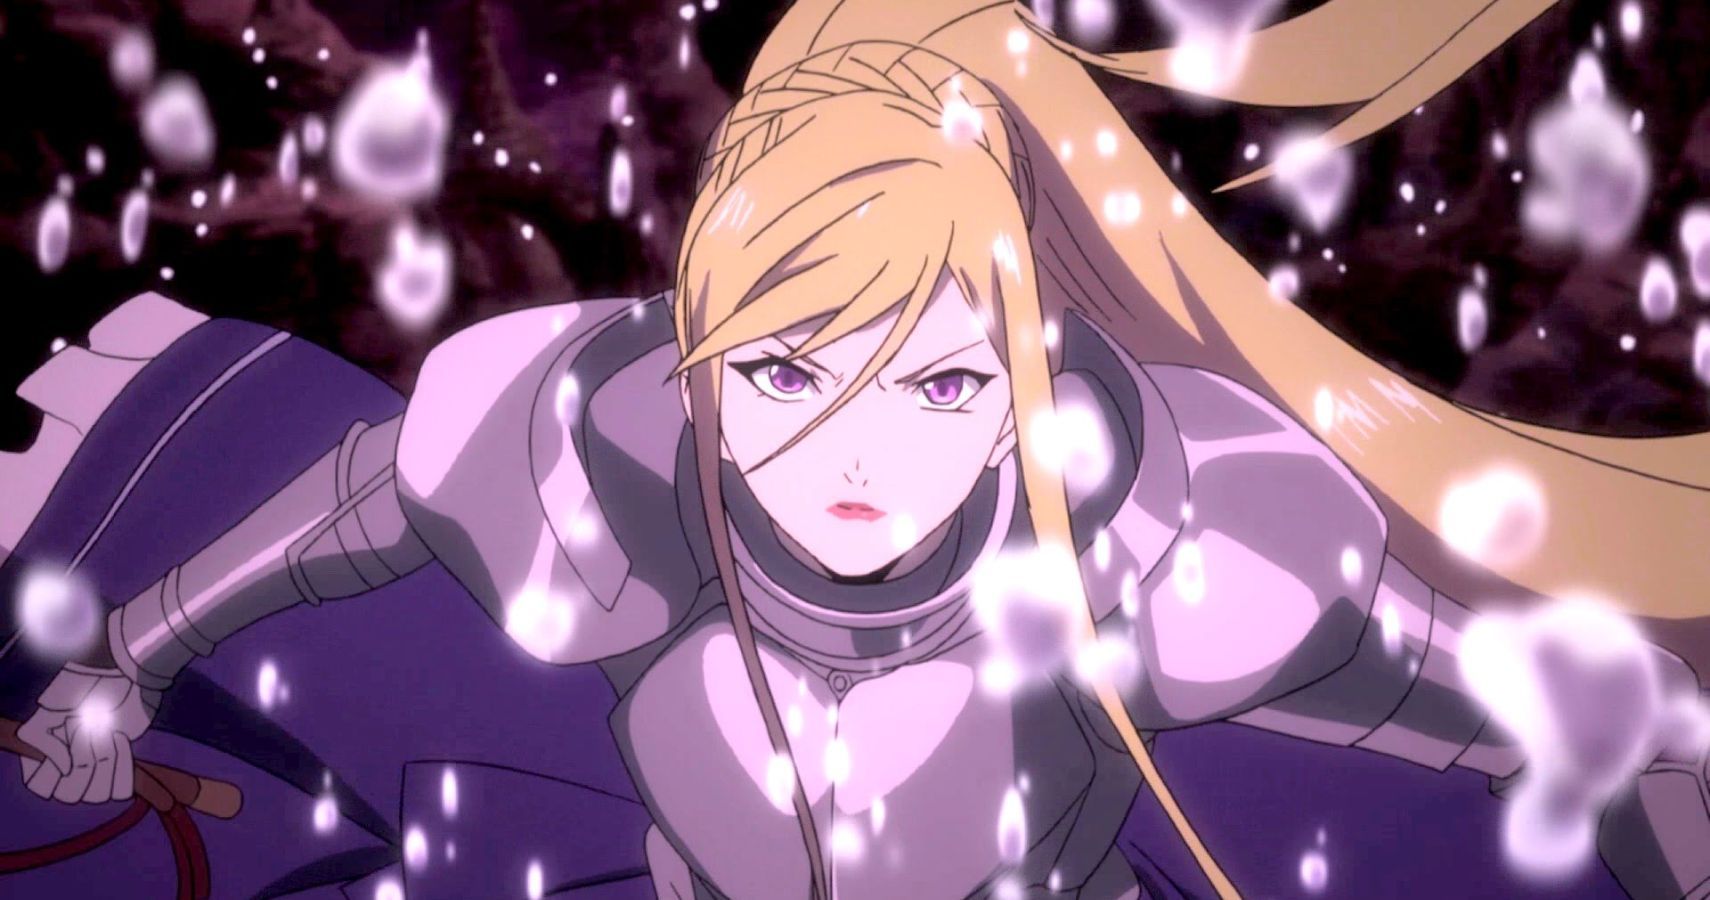 Noragami 10 Most Powerful Gods Ranked Cbr Suggestions for changes and additions in the group are definitely welcome. noragami 10 most powerful gods ranked